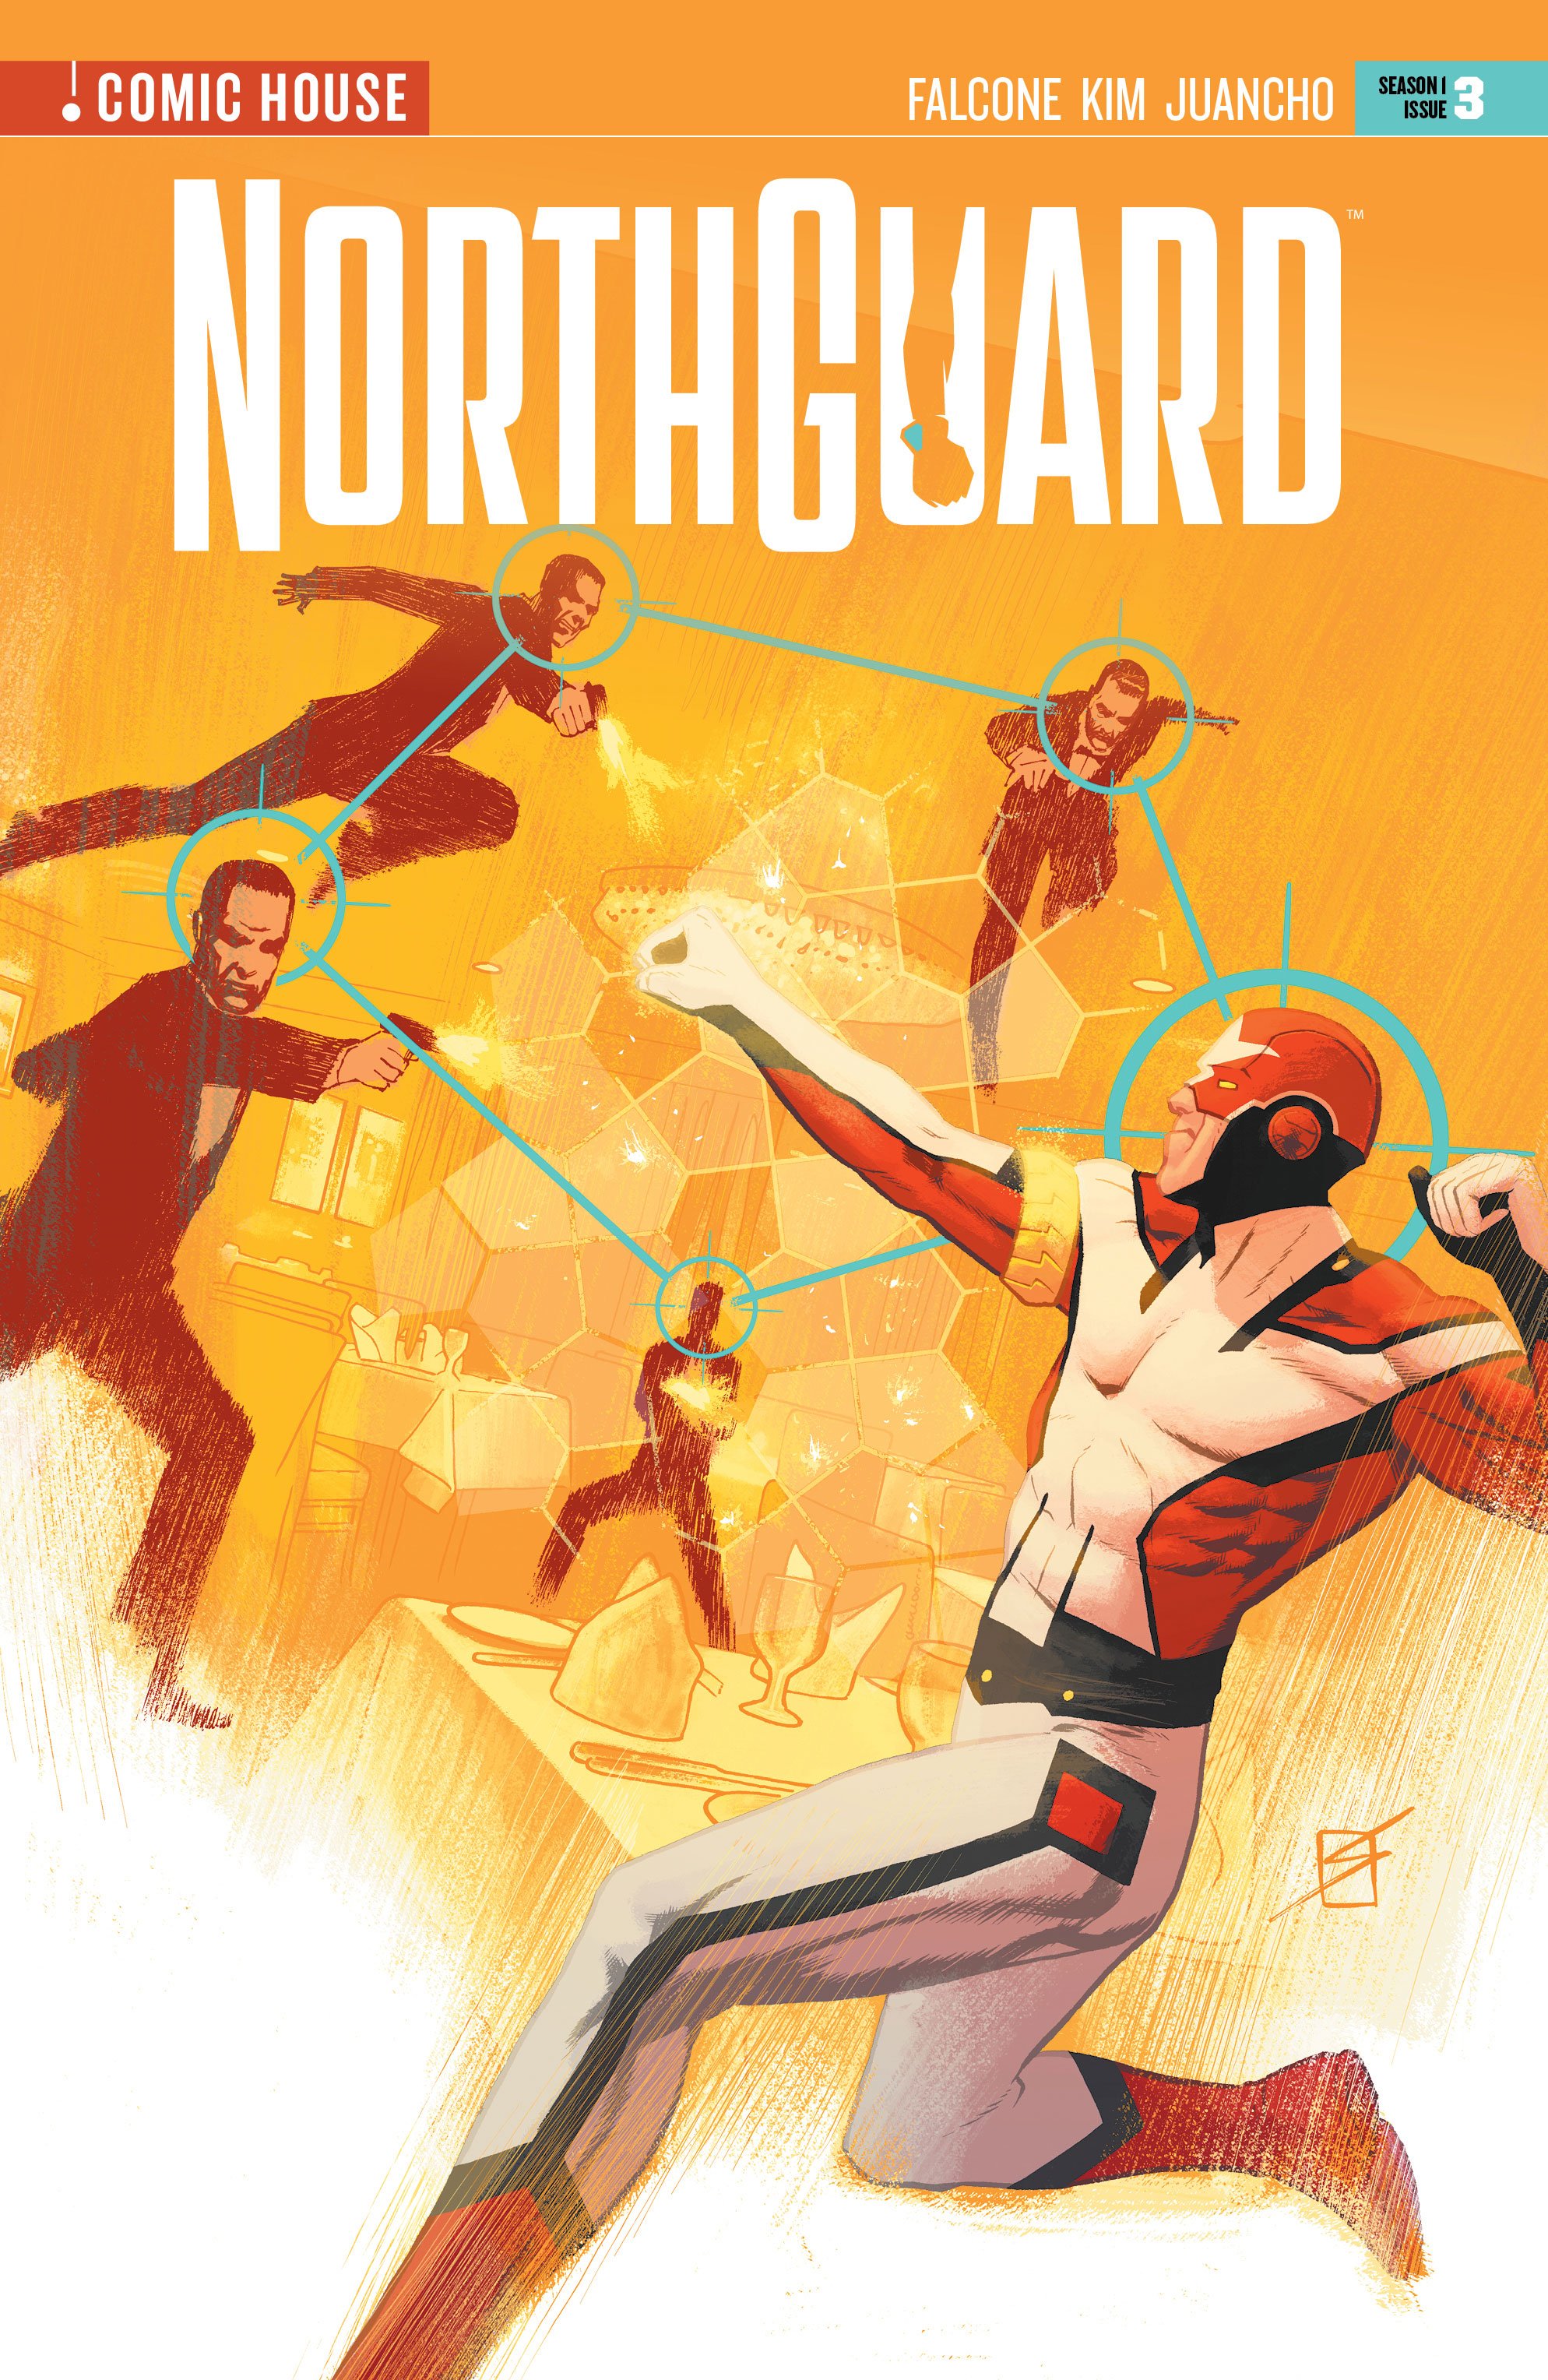 Northguard_003_S1_issue3_cover-A.jpg